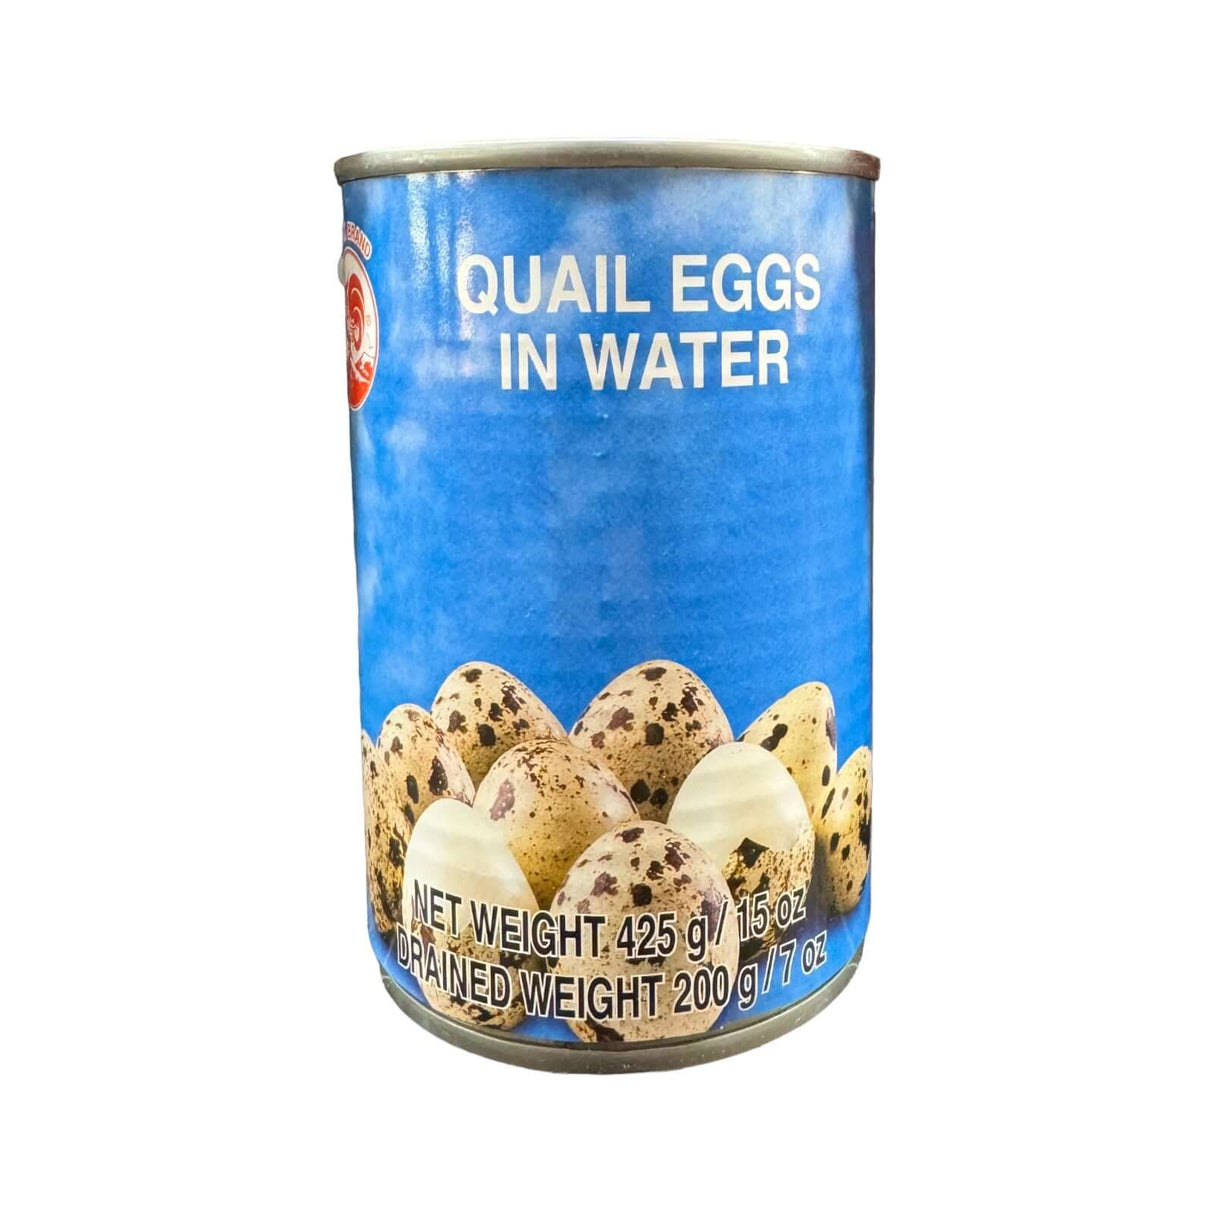 Cock Brand Quail Eggs in Water